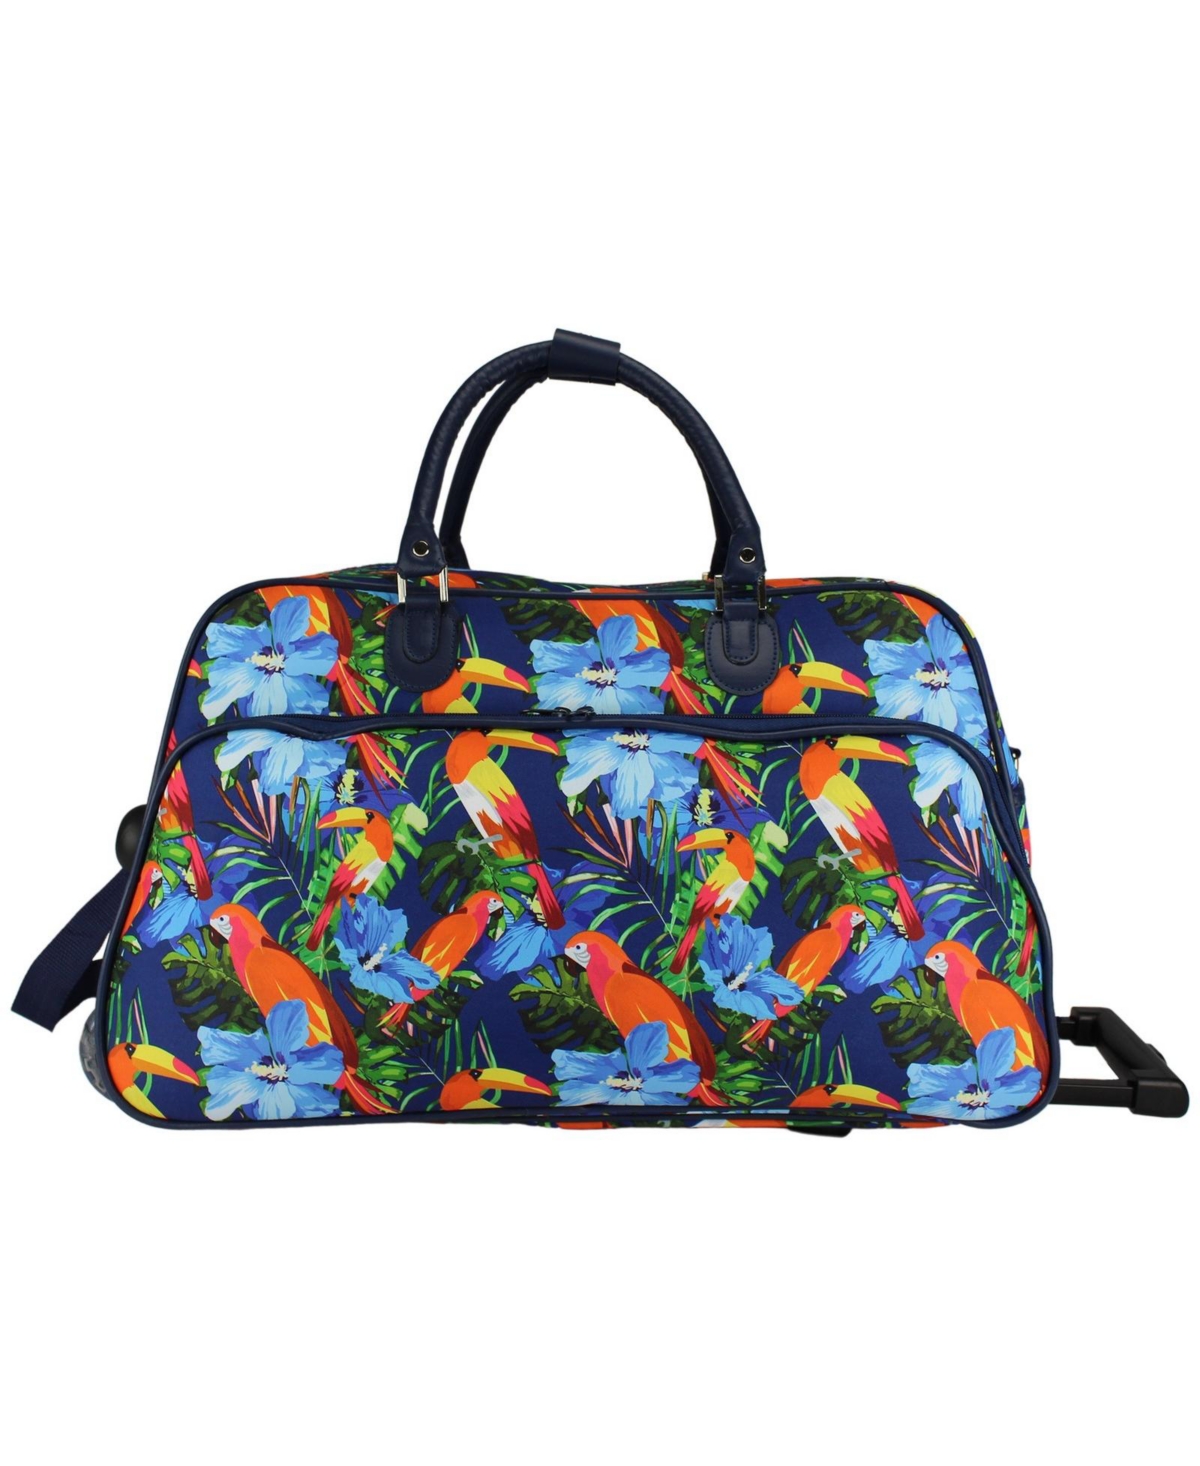 Wildlife Edit 21-Inch Carry-On Rolling Duffel Bag - Parrot hibiscus